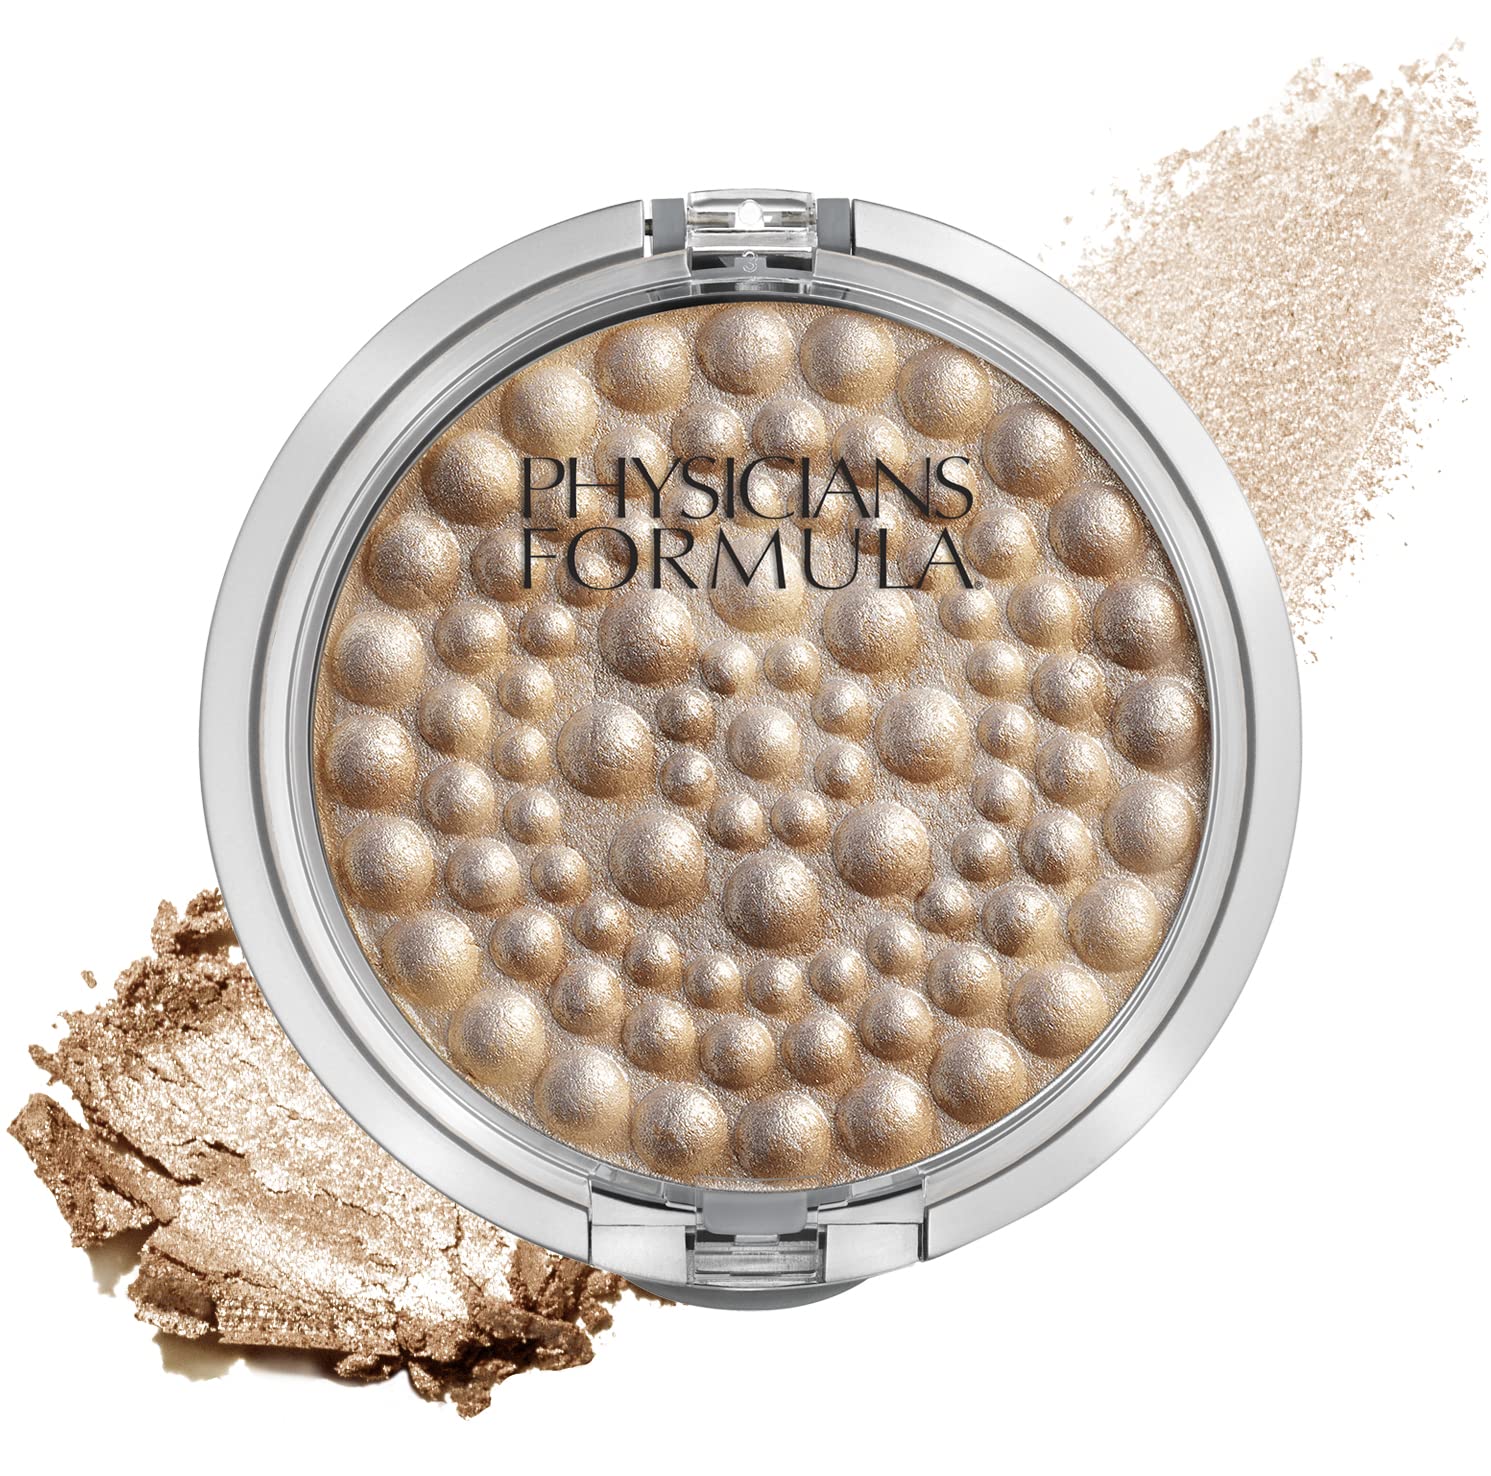 Physicians Formula Highlighter Makeup Powder Mineral Glow Pearls, Beige Pearl, Dermatologist Tested